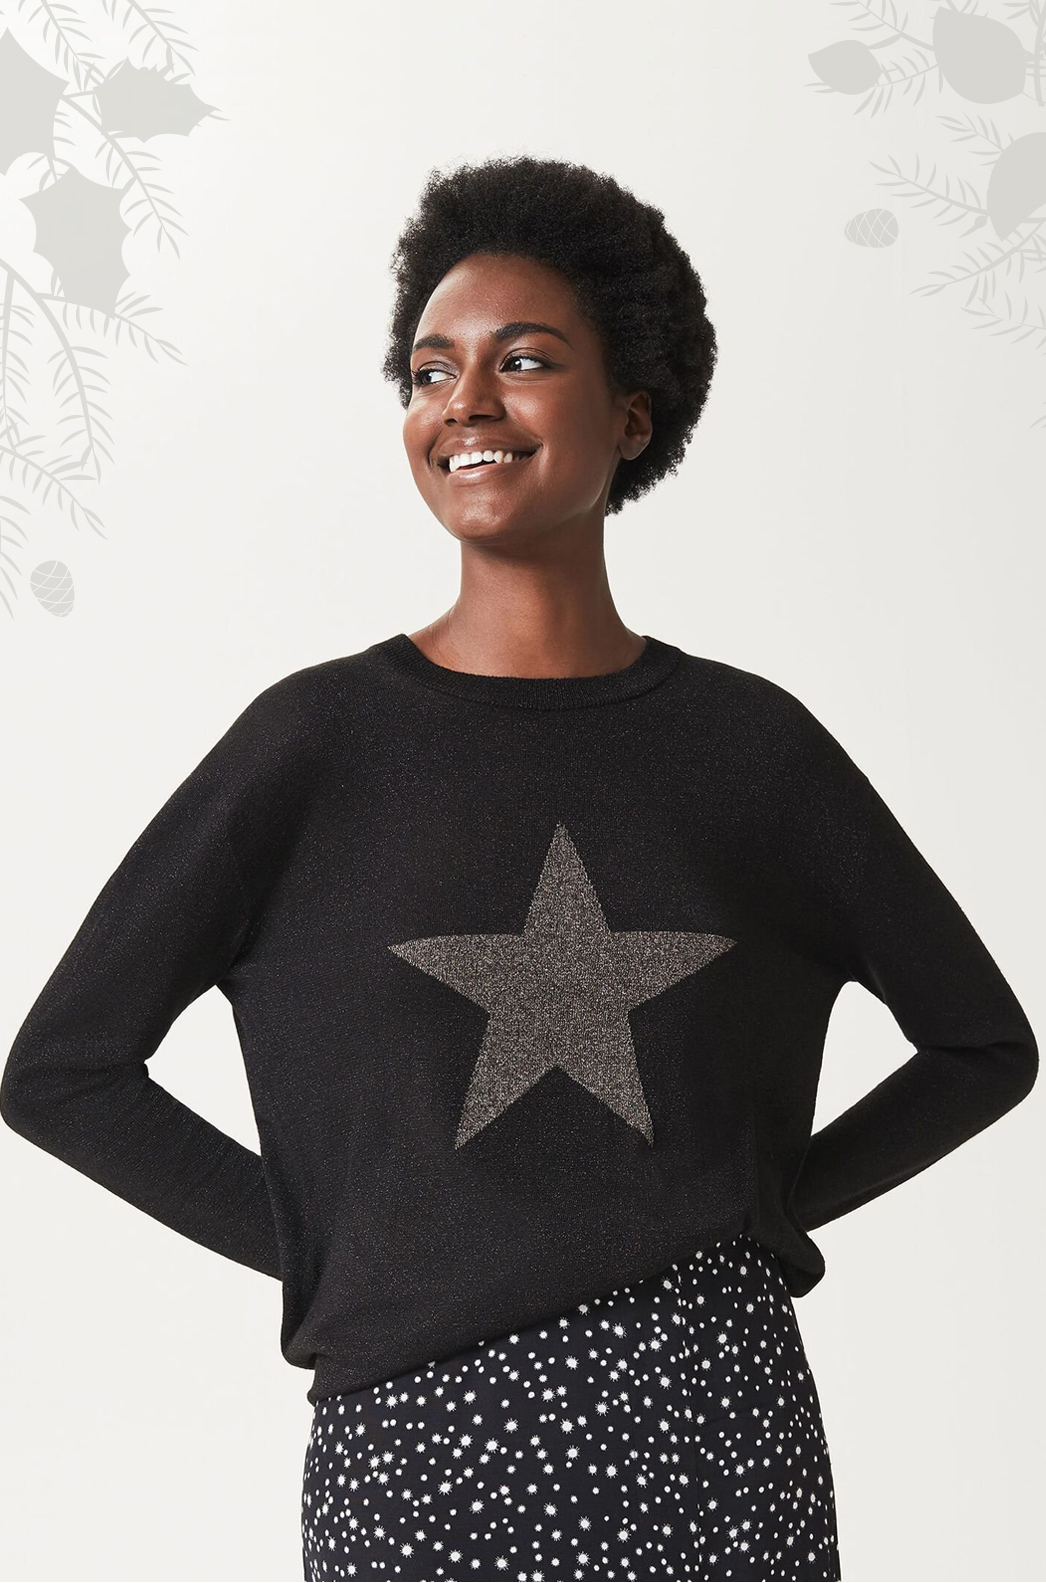 Model photographed wearing a black jumper with a gold star motif.